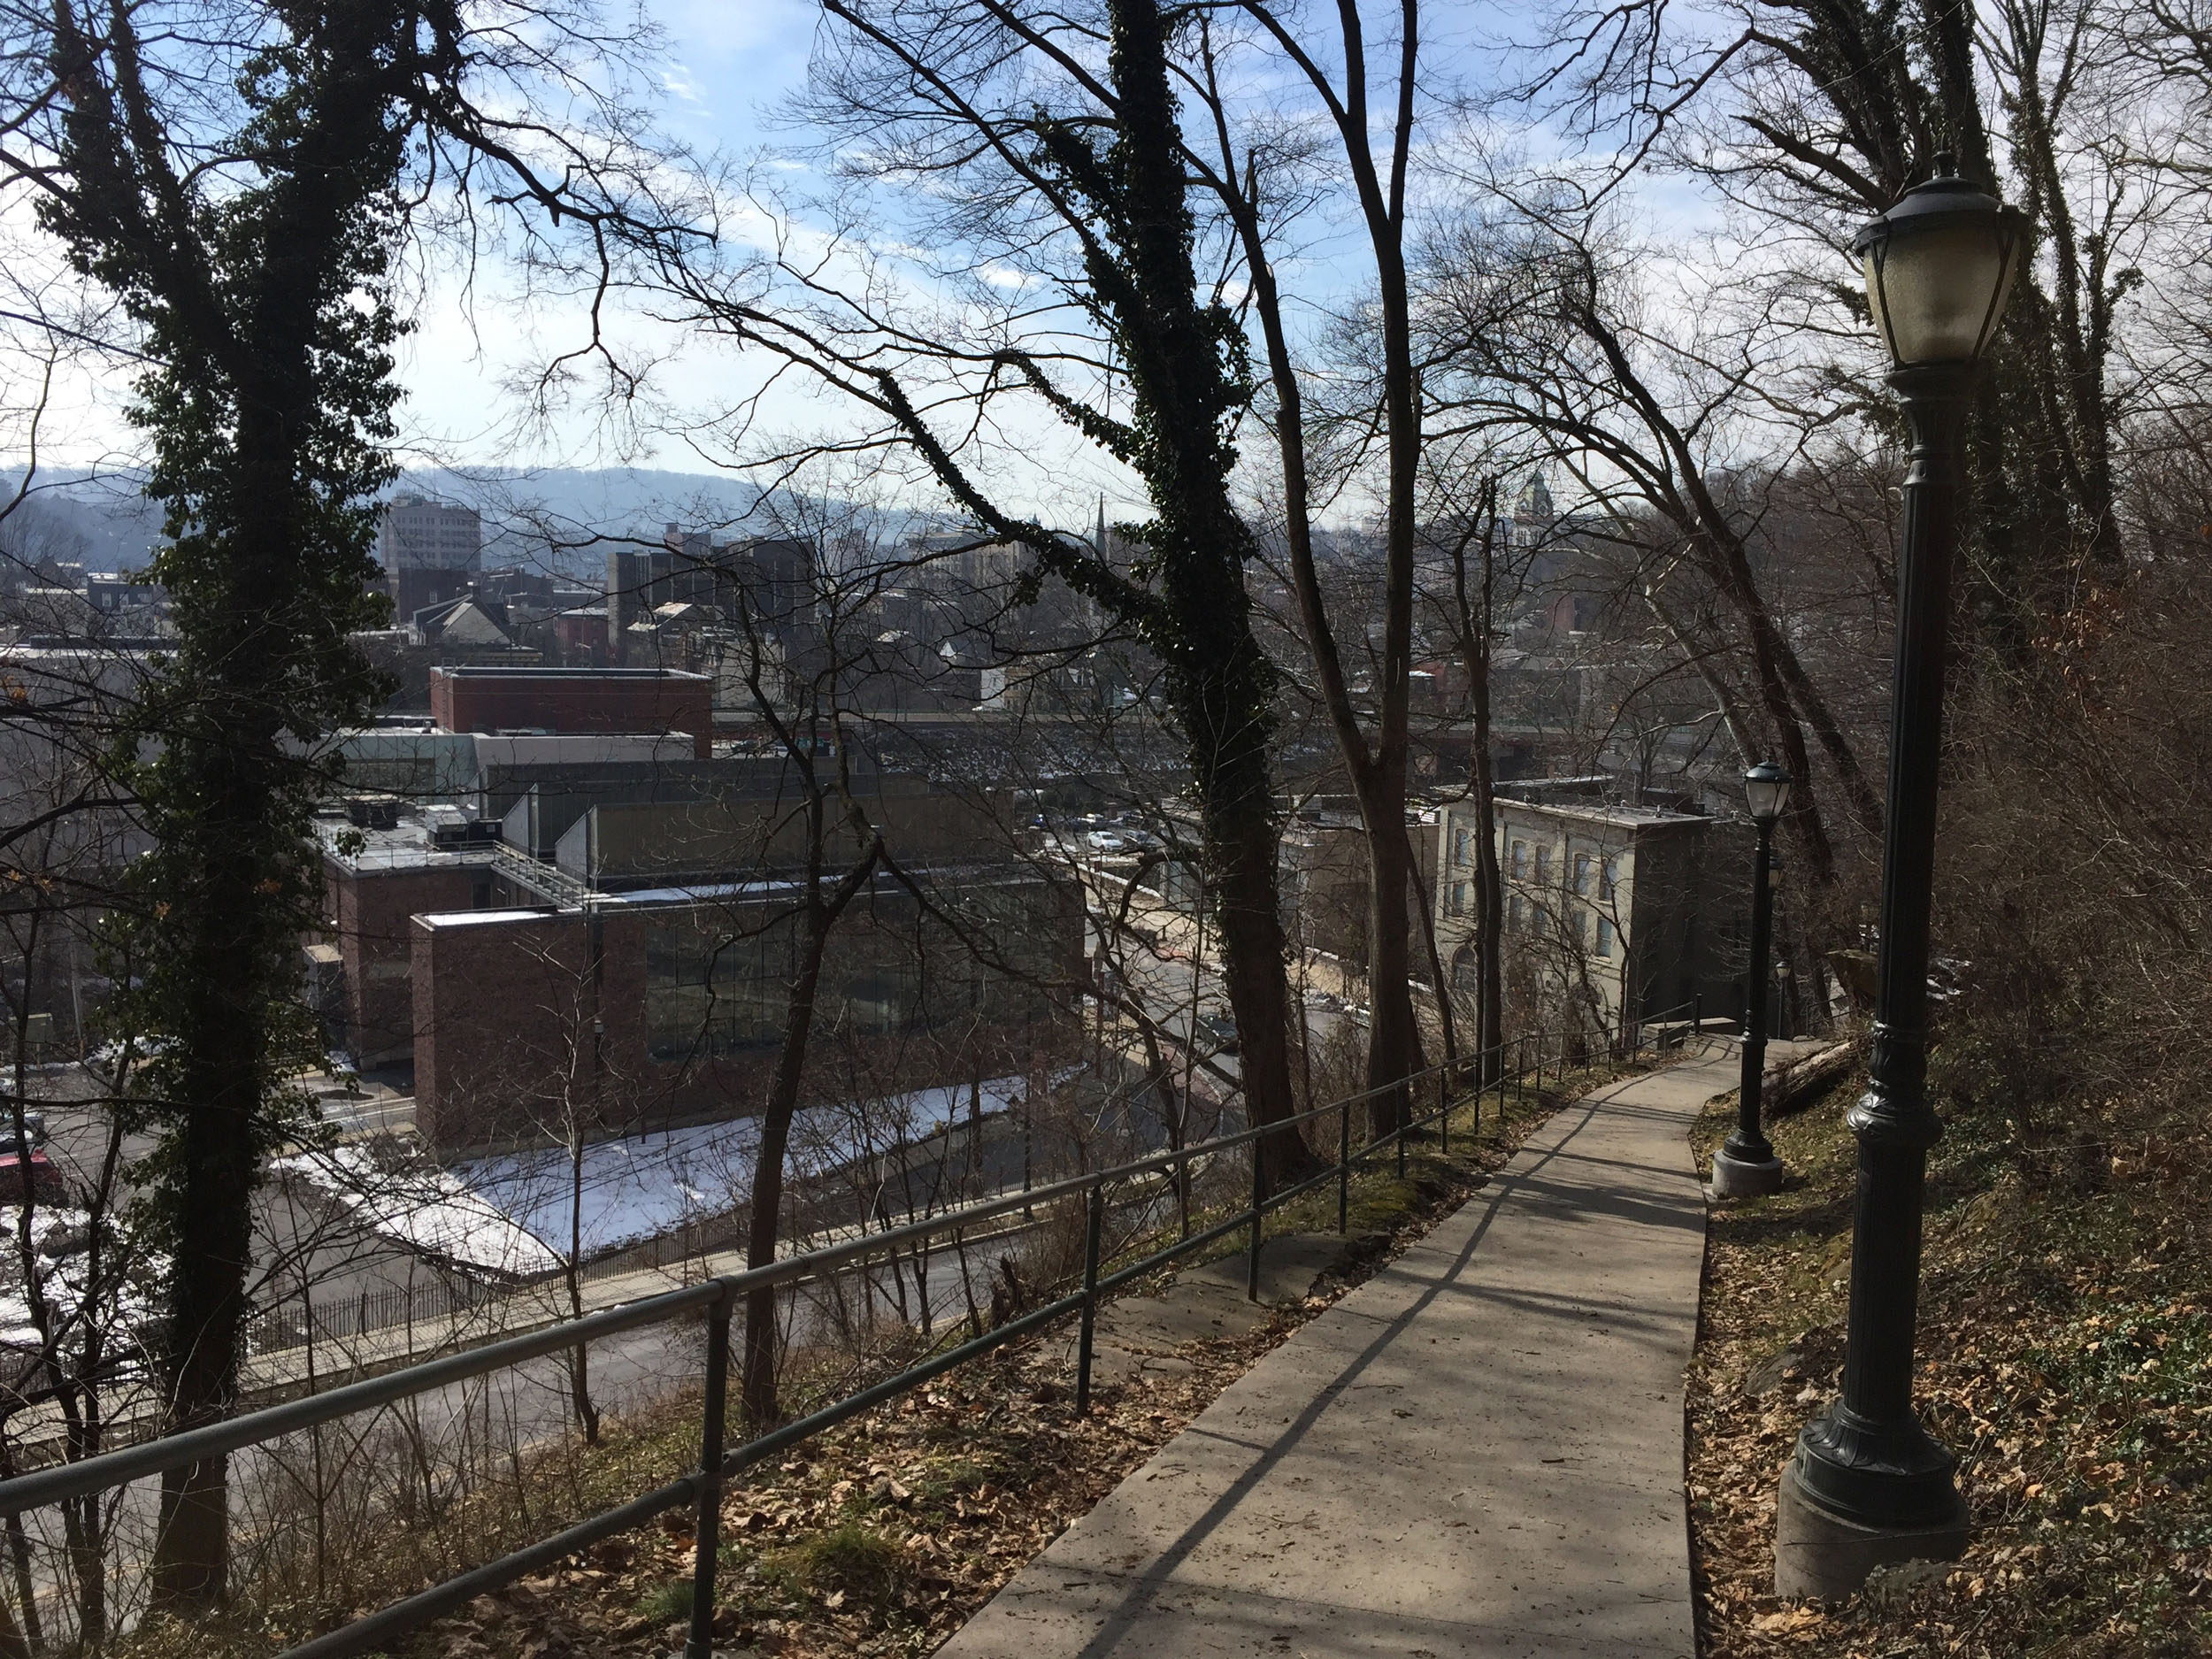 Bare trees and a concrete path overlook the city of Easton.